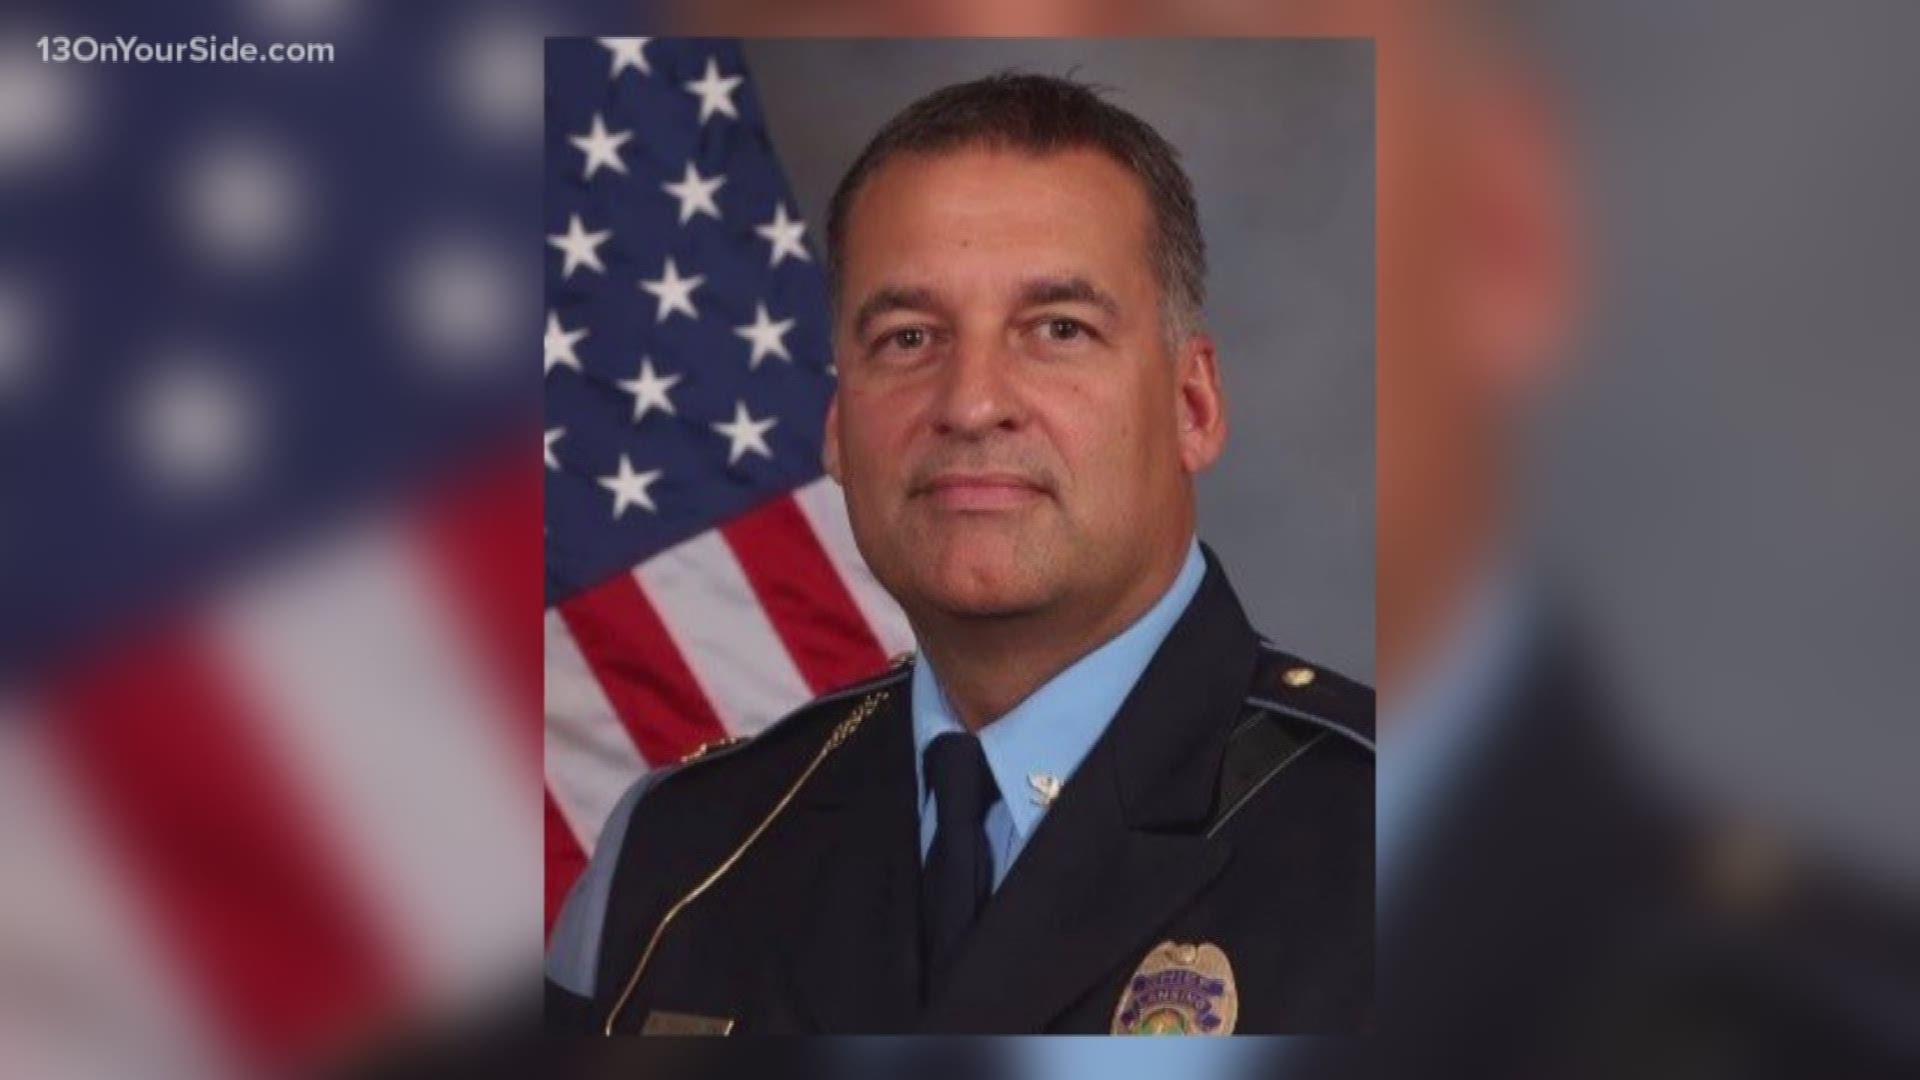 Forum held for Grand Rapids Police Chief